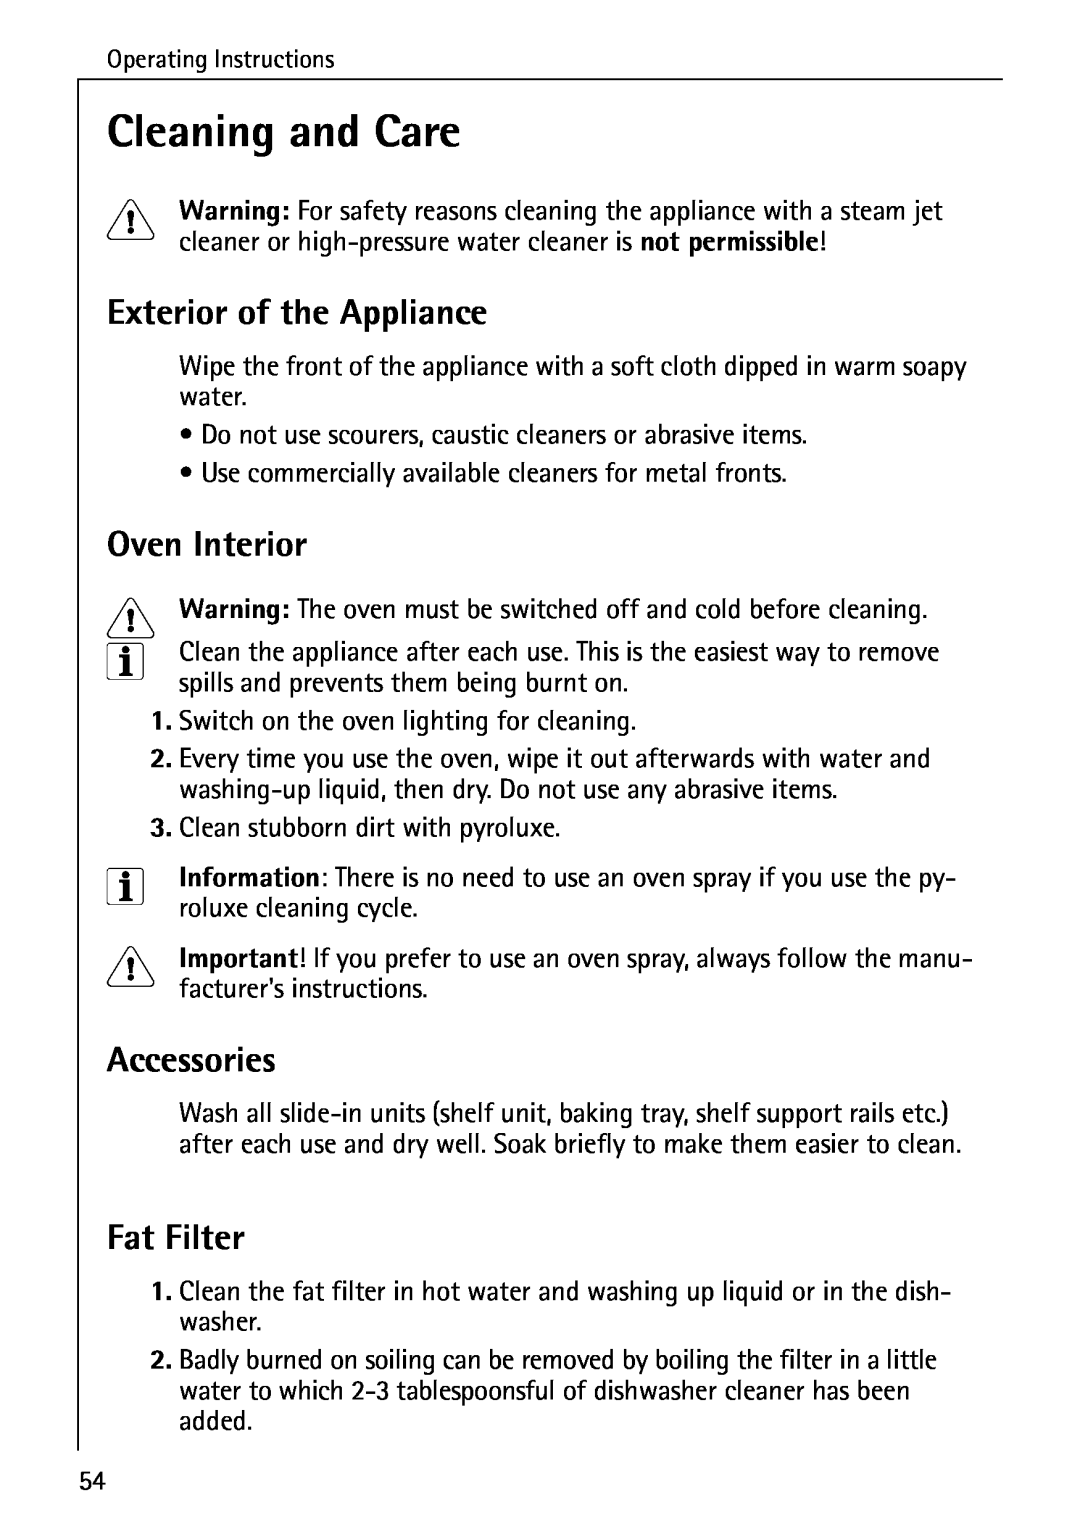 Electrolux B6140-1 manual Cleaning and Care, Exterior of the Appliance, Oven Interior, Accessories, Fat Filter 